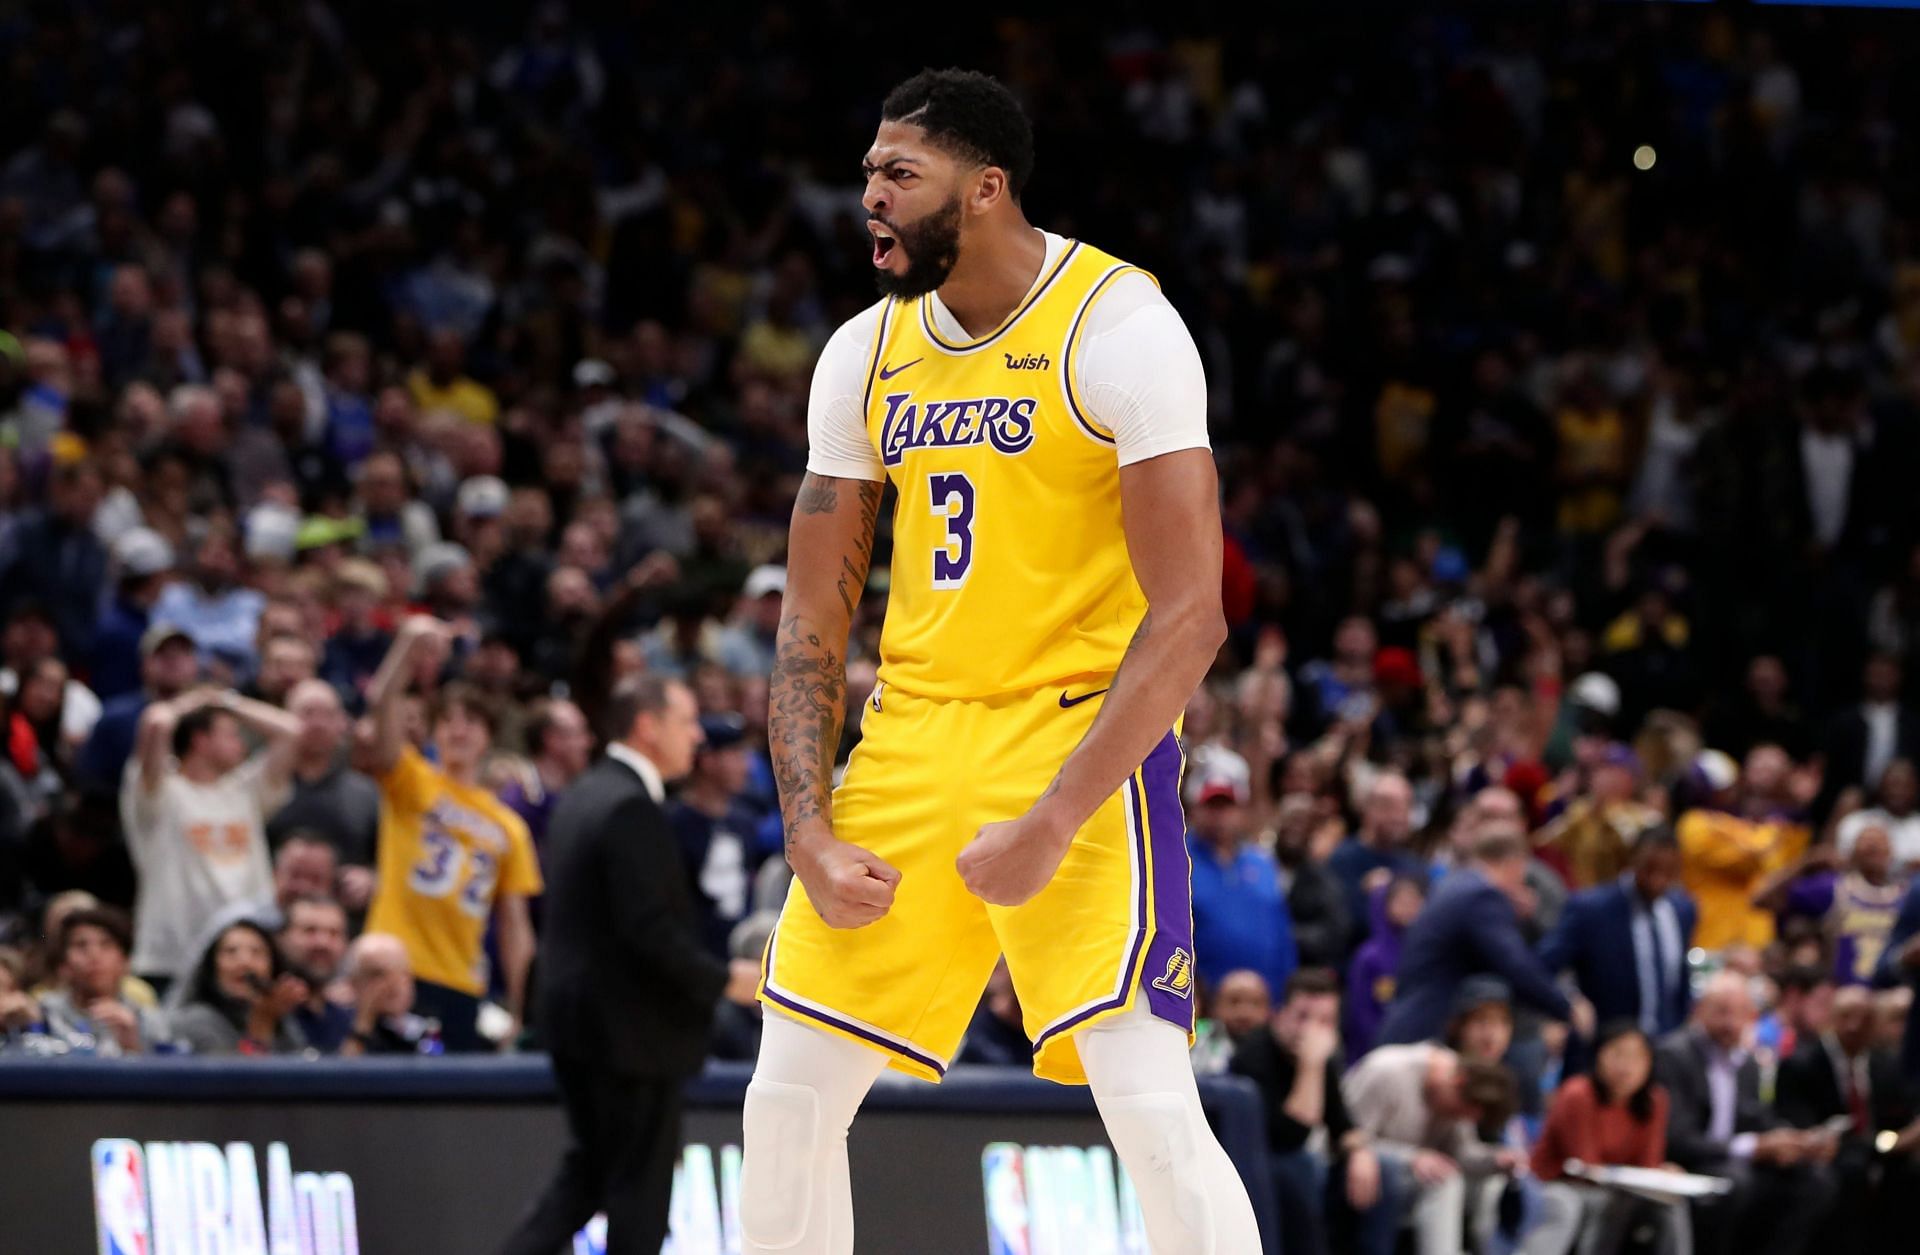 Los Angeles Lakers forward Anthony Davis continues to be a force defensively